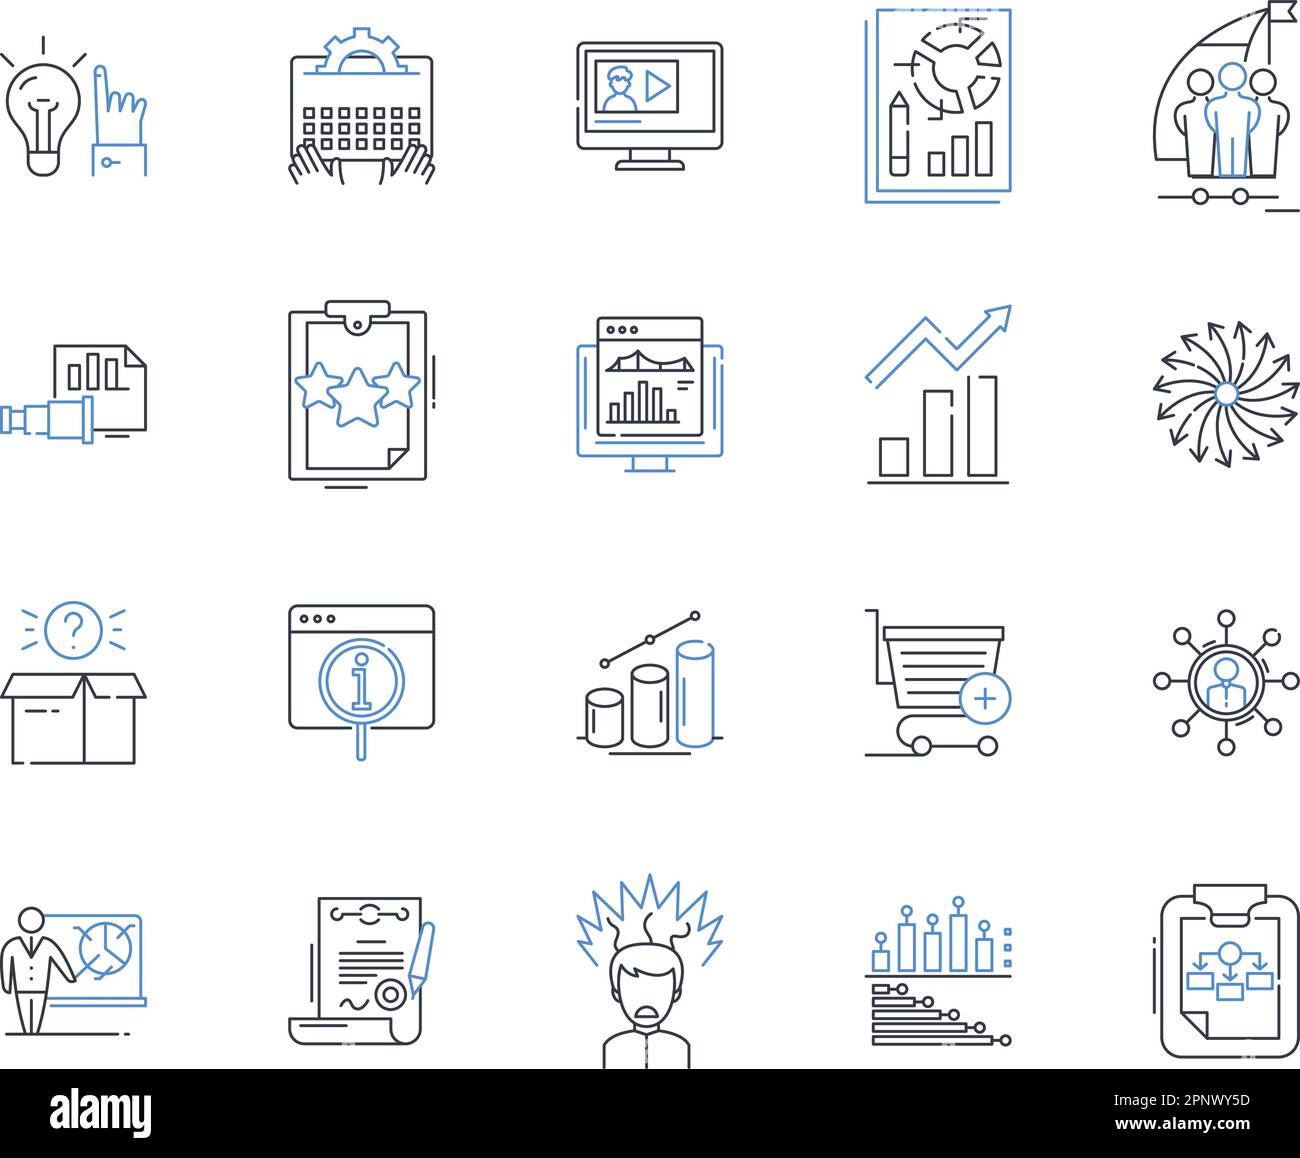 Blueprint and map line icons collection. Cartography, Navigation, Design, Surveying, Architecture, Engineering, Topography vector and linear Stock Vector